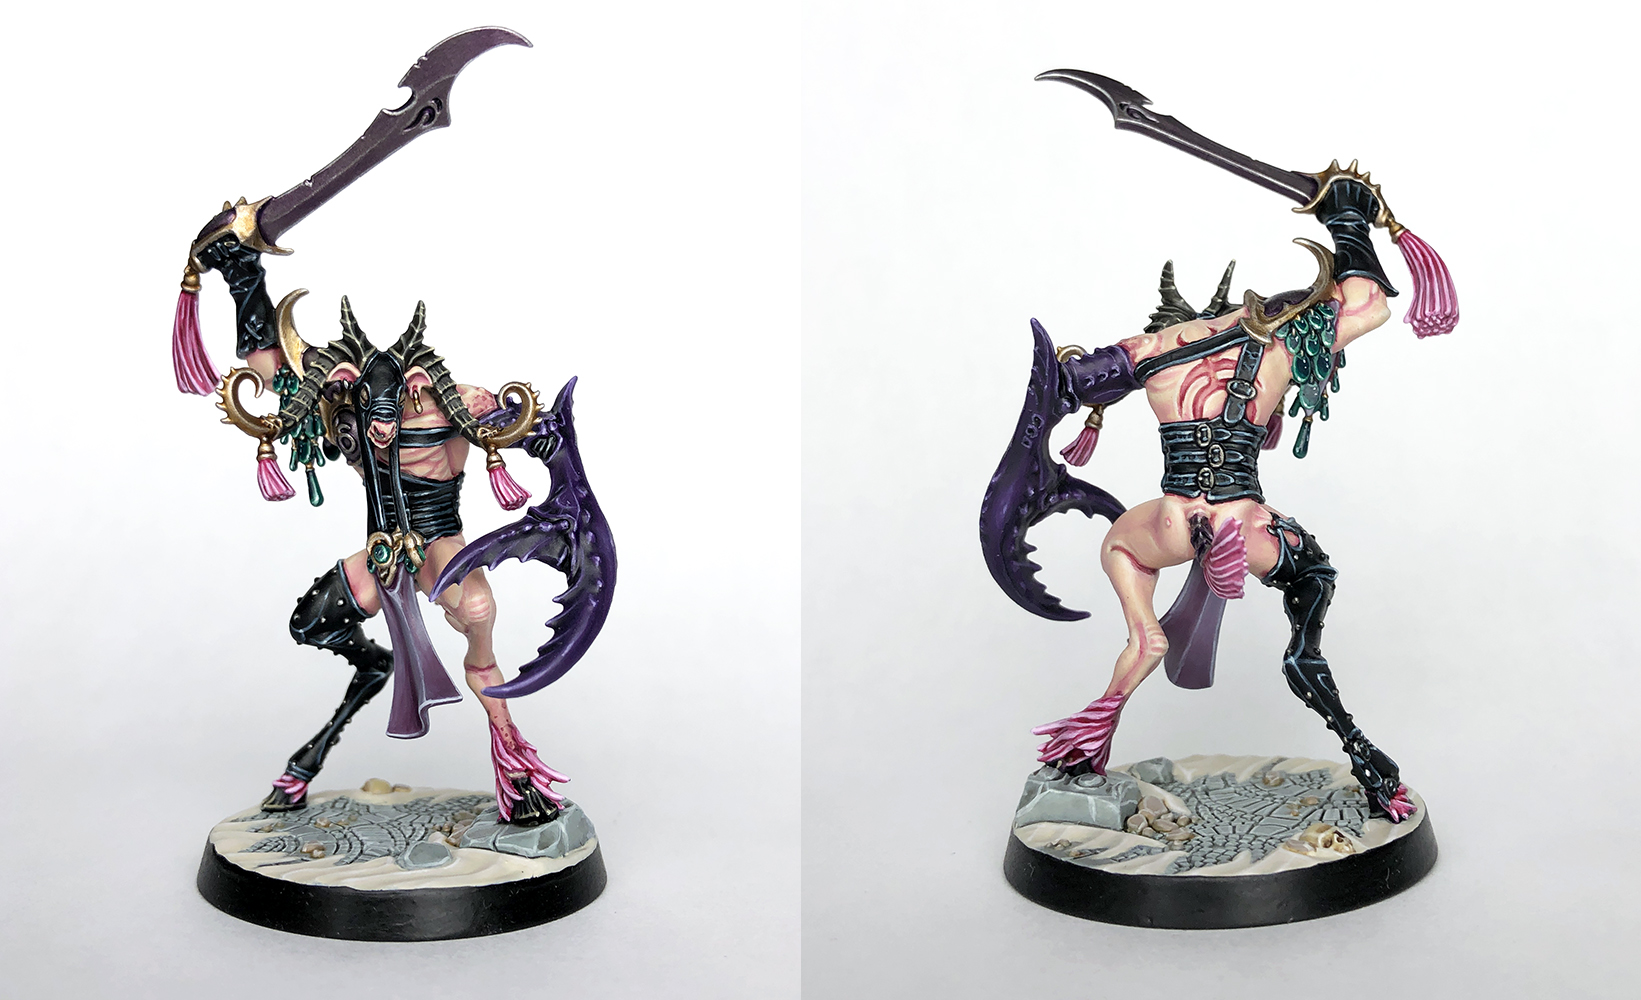 Mengel Miniatures: Shade or Contrast Paint?